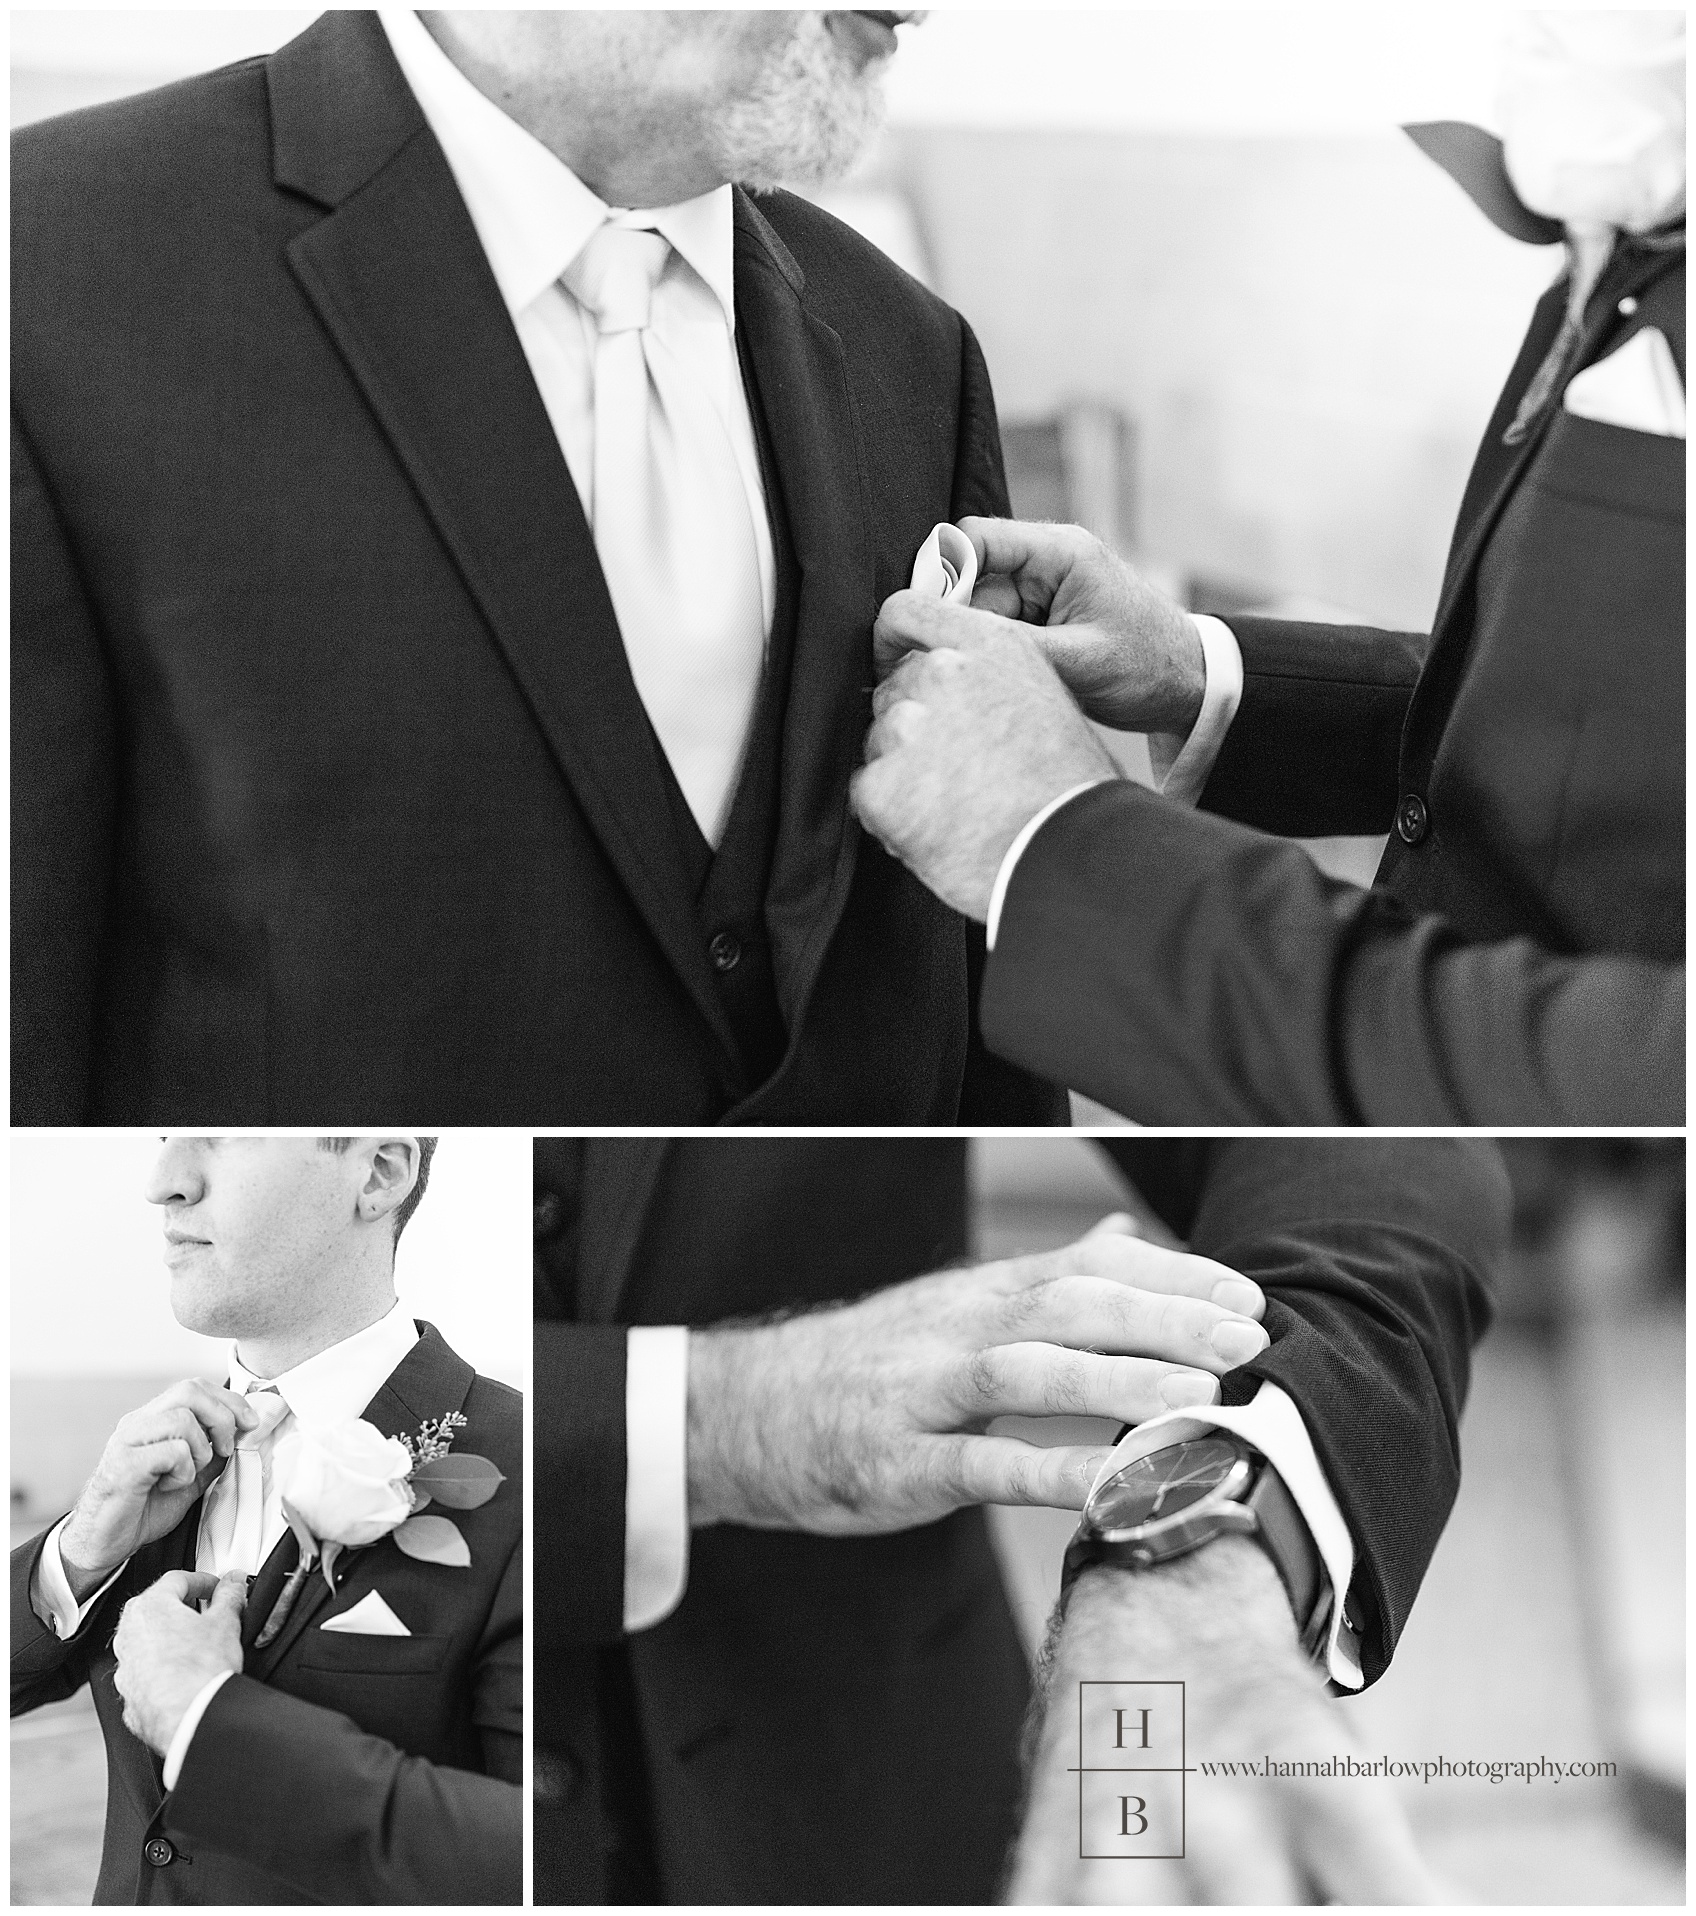 Black and White Photos of the Groom Getting Ready